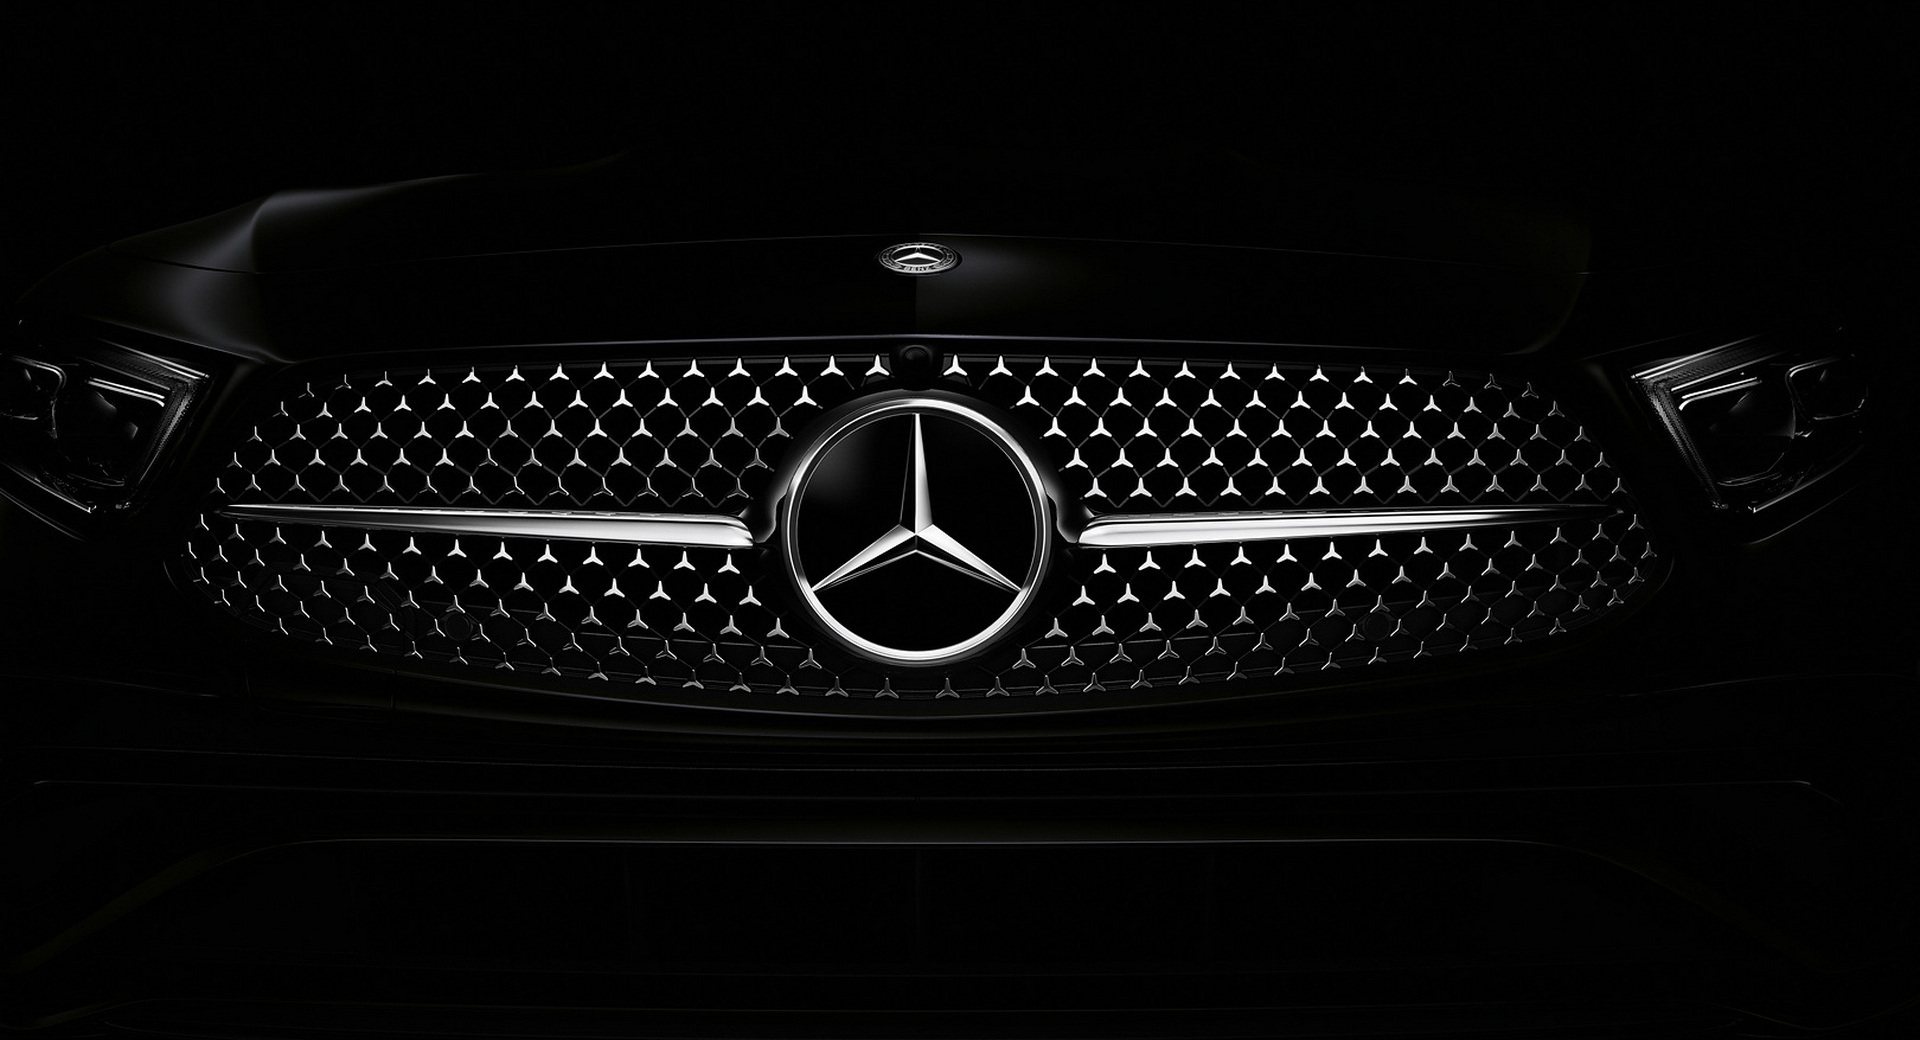 https://www.carscoops.com/wp-content/uploads/2021/11/2021-Mercedes-Star-In-Ring-100th-Anniversary-9.jpg